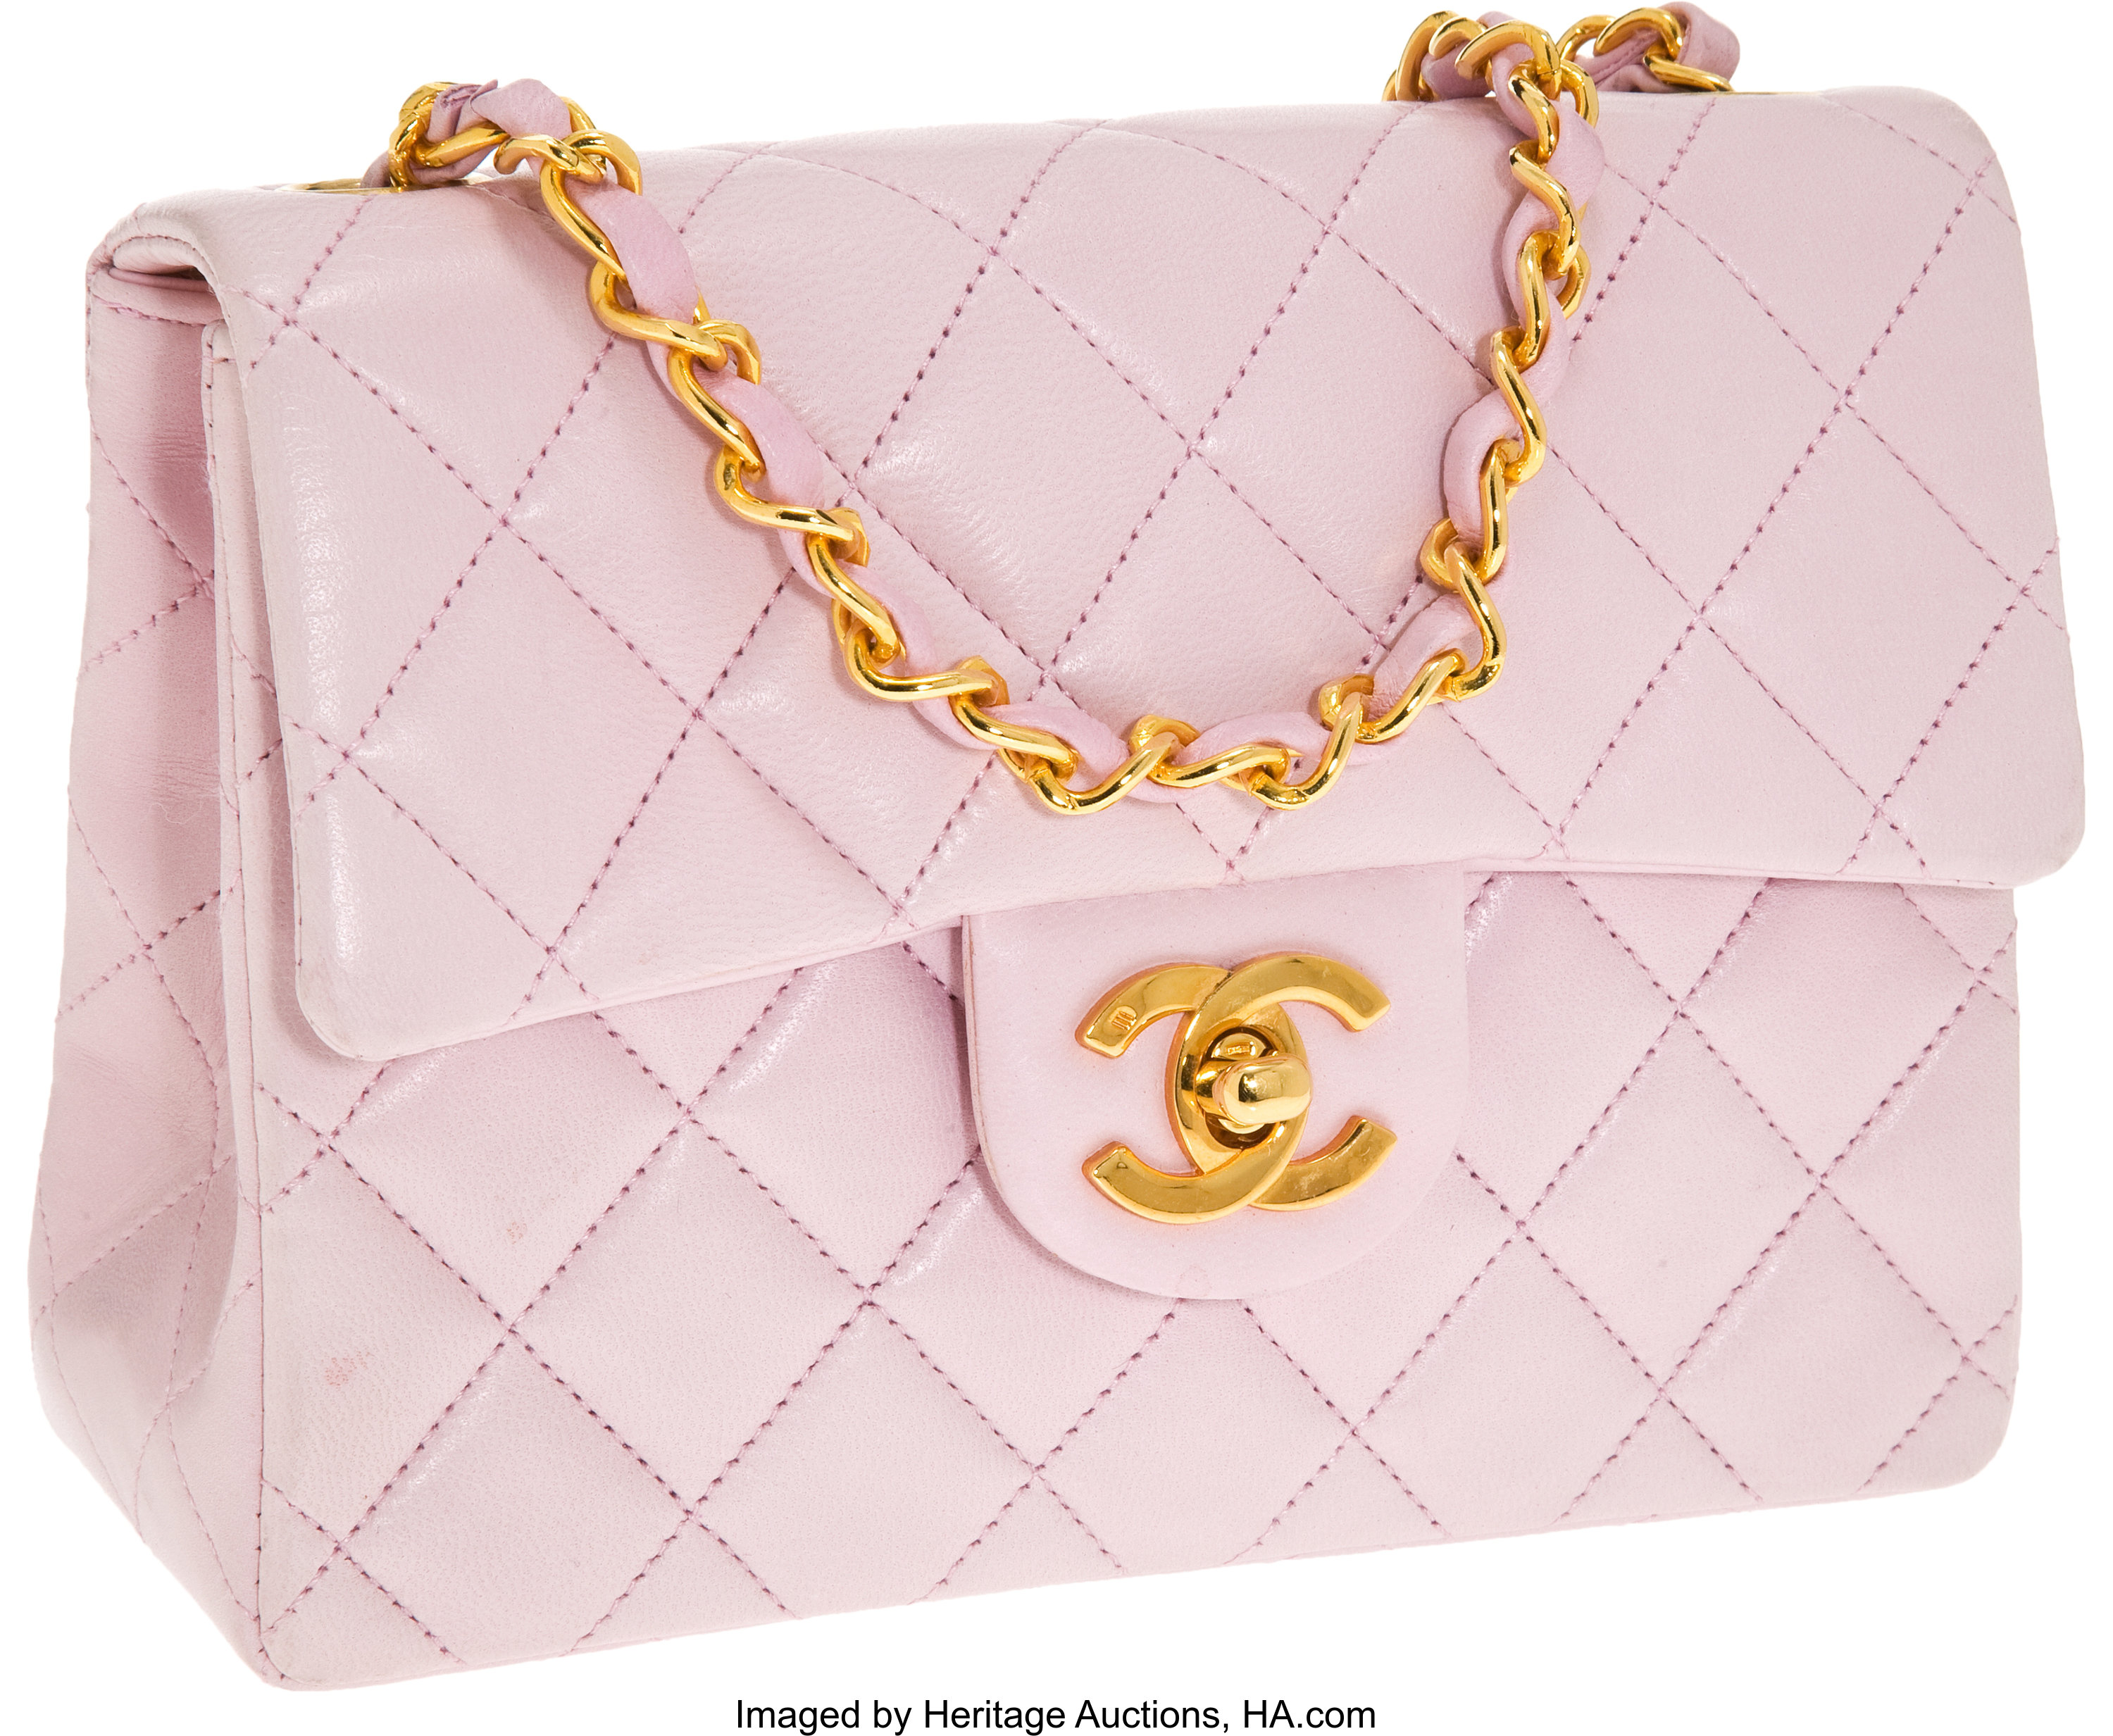 Chanel Light Pink Lambskin Leather Quilted Mini Classic Flap Bag, Lot  #56450